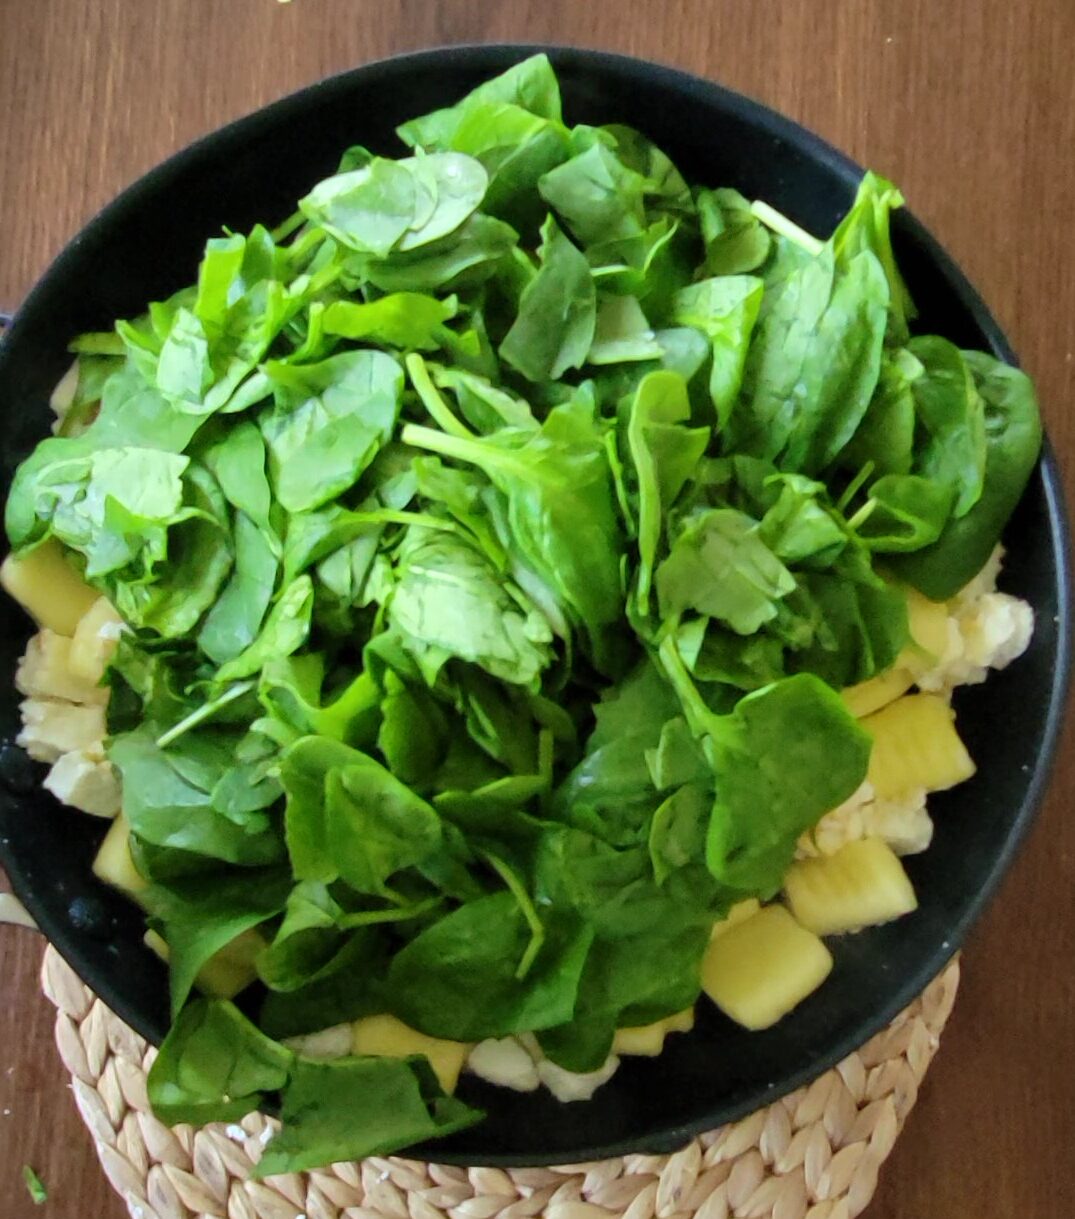 A pile of spinach in the pan